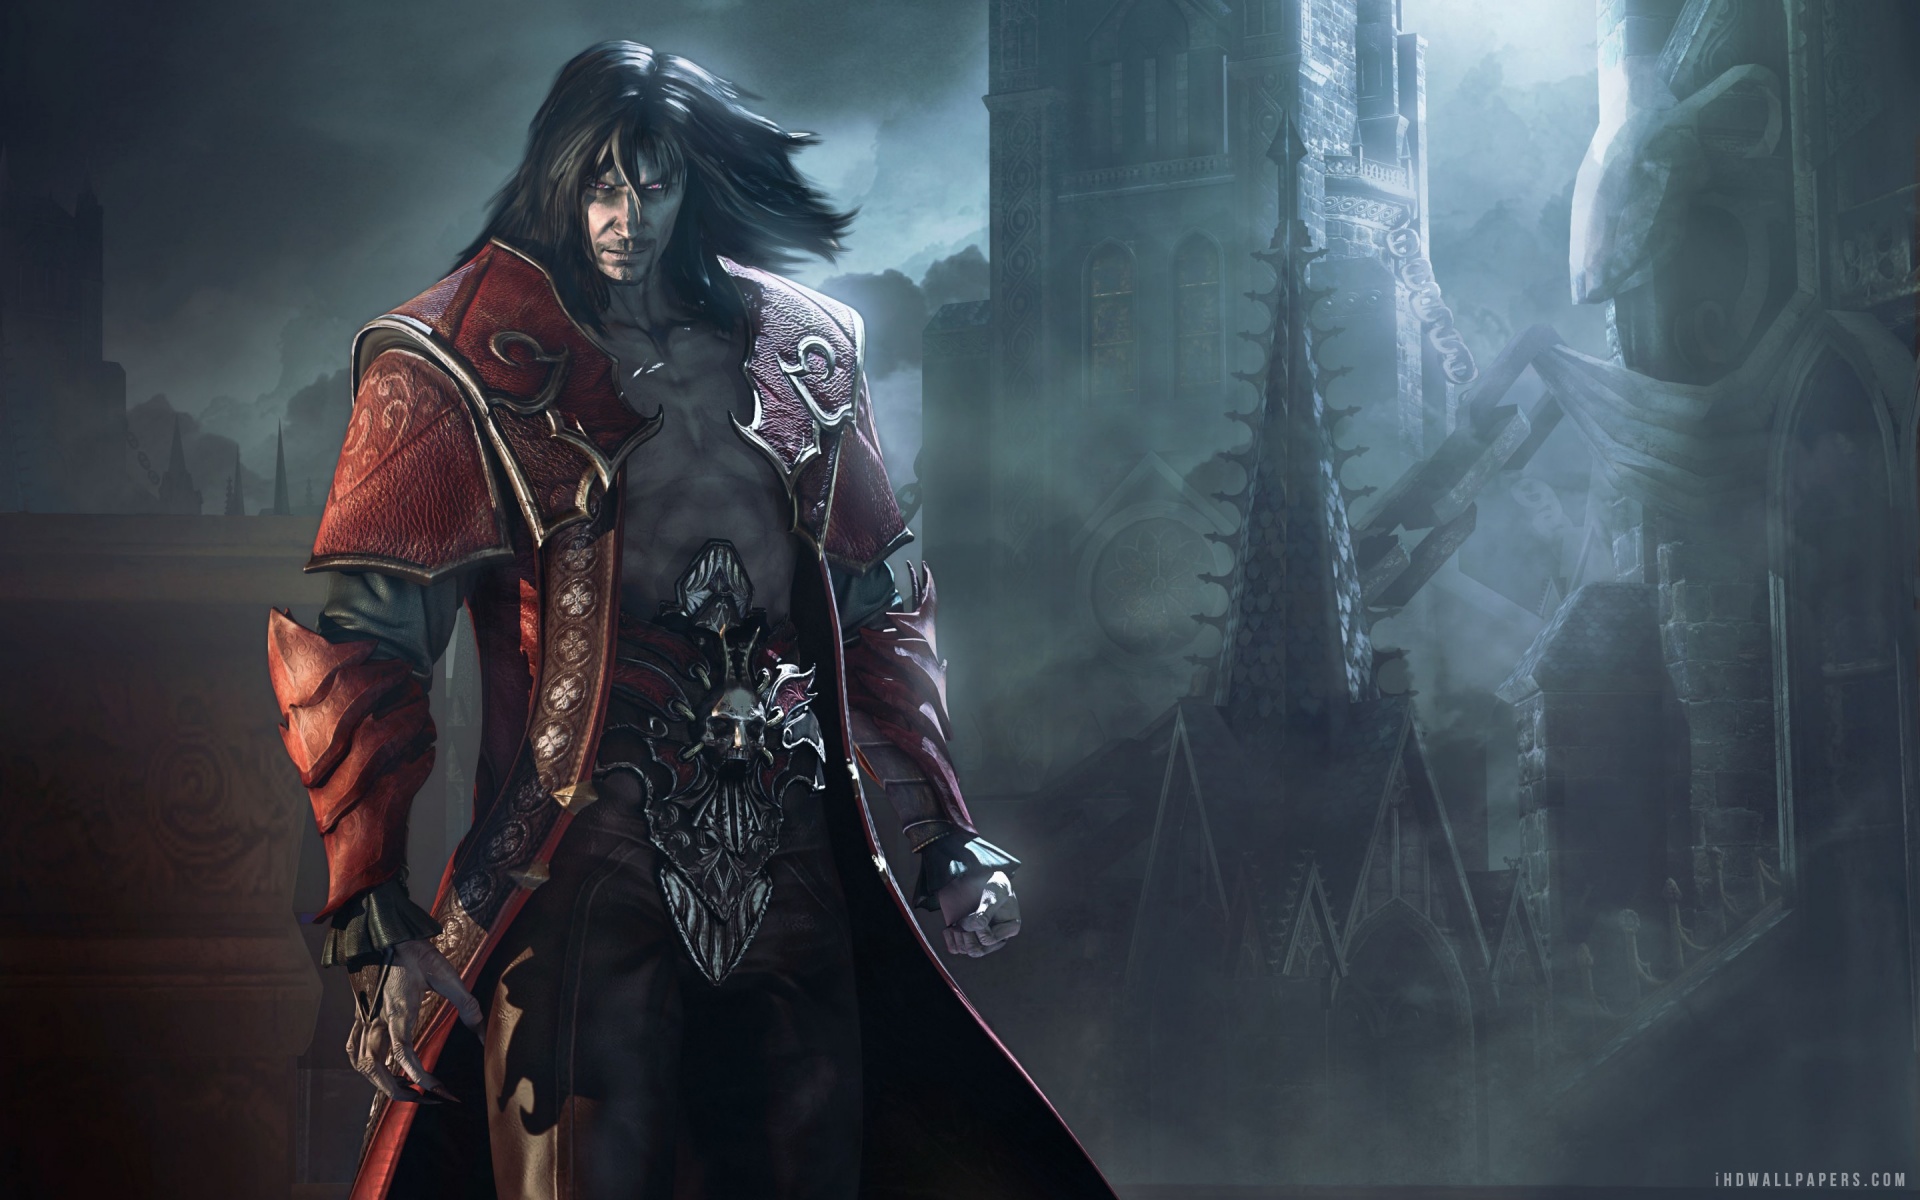 Free download Dracula Castlevania Lords of Shadow 2 HD Wallpaper iHD Wallpaper [1920x1200] for your Desktop, Mobile & Tablet. Explore Castlevania Background. Castlevania Wallpaper, Castlevania Lords of Shadow Wallpaper, Castlevania Wallpaper